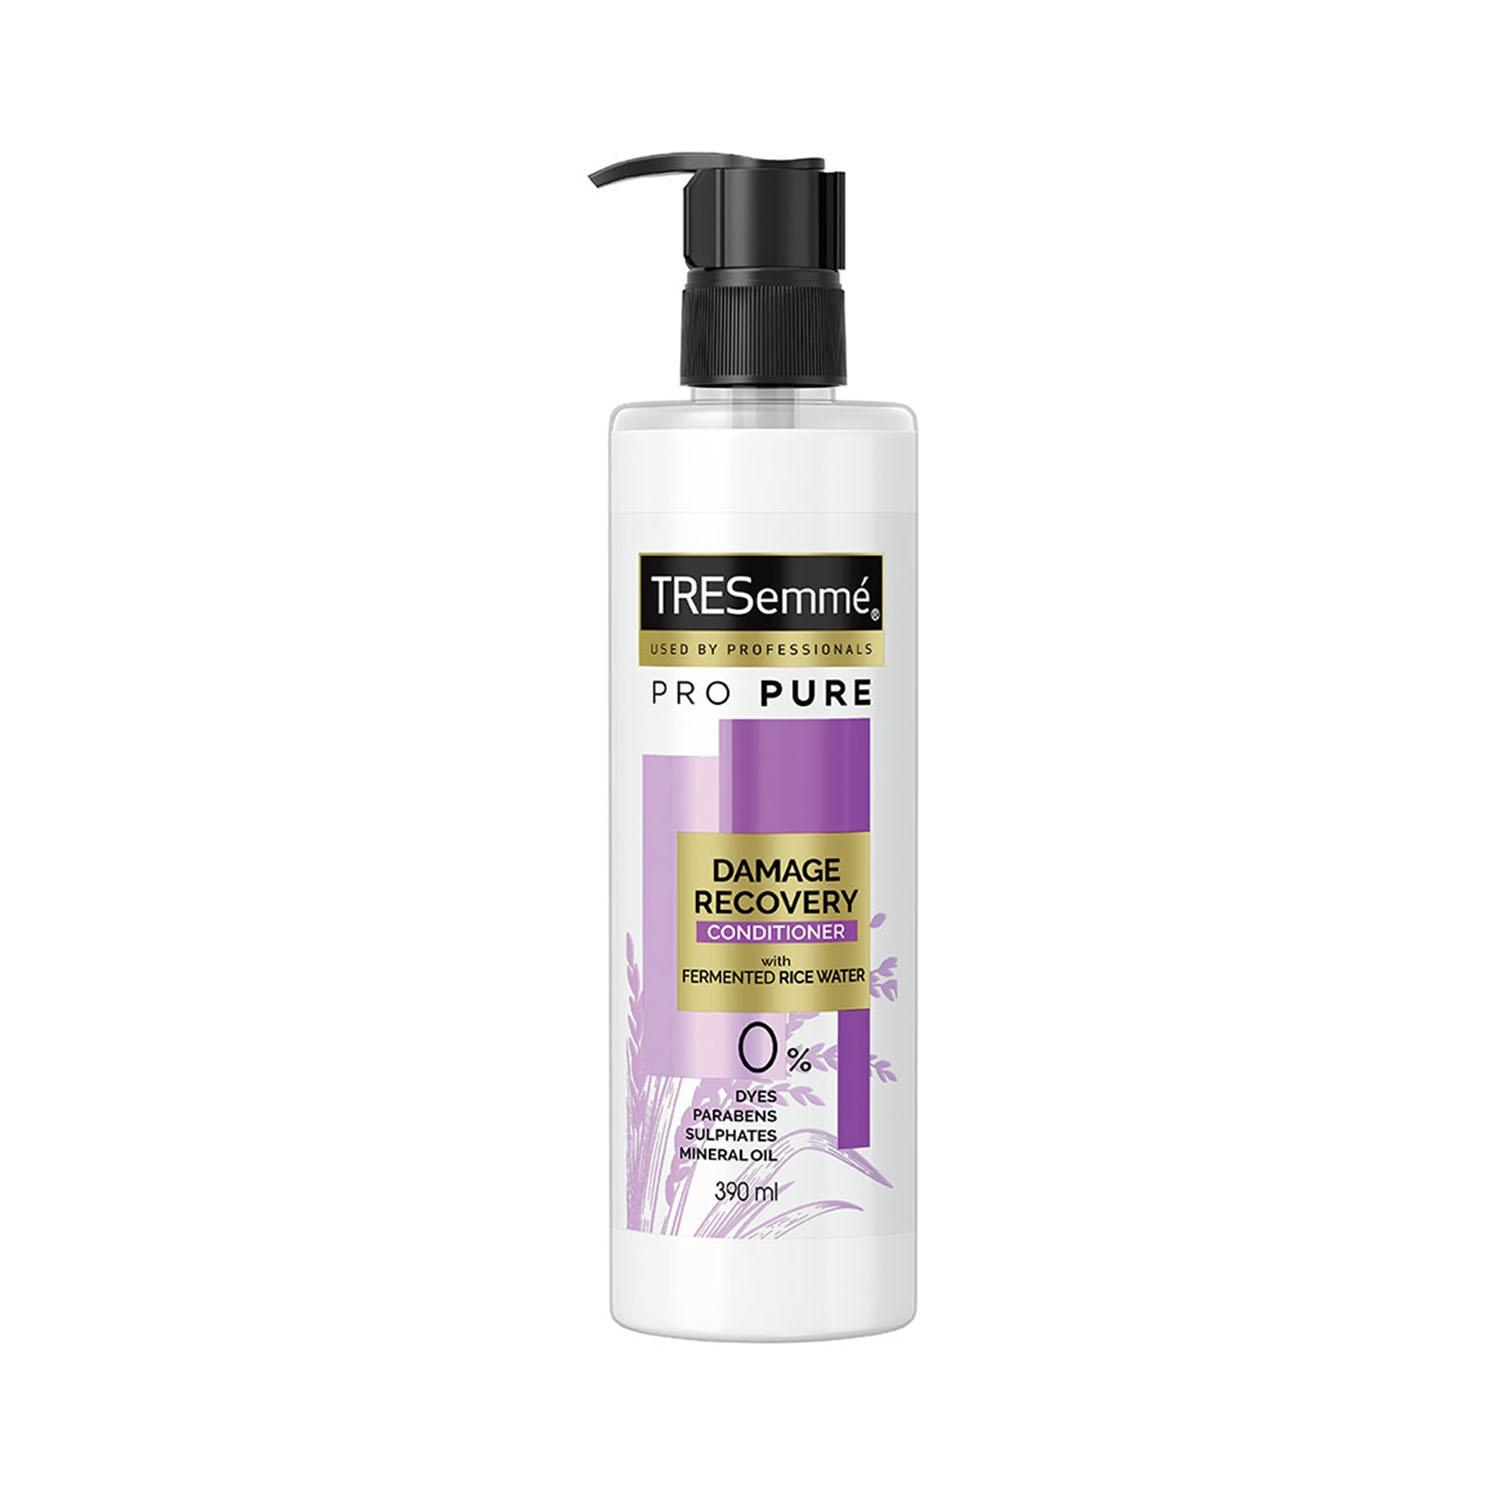 tresemme pro pure damage recovery conditioner (390ml)